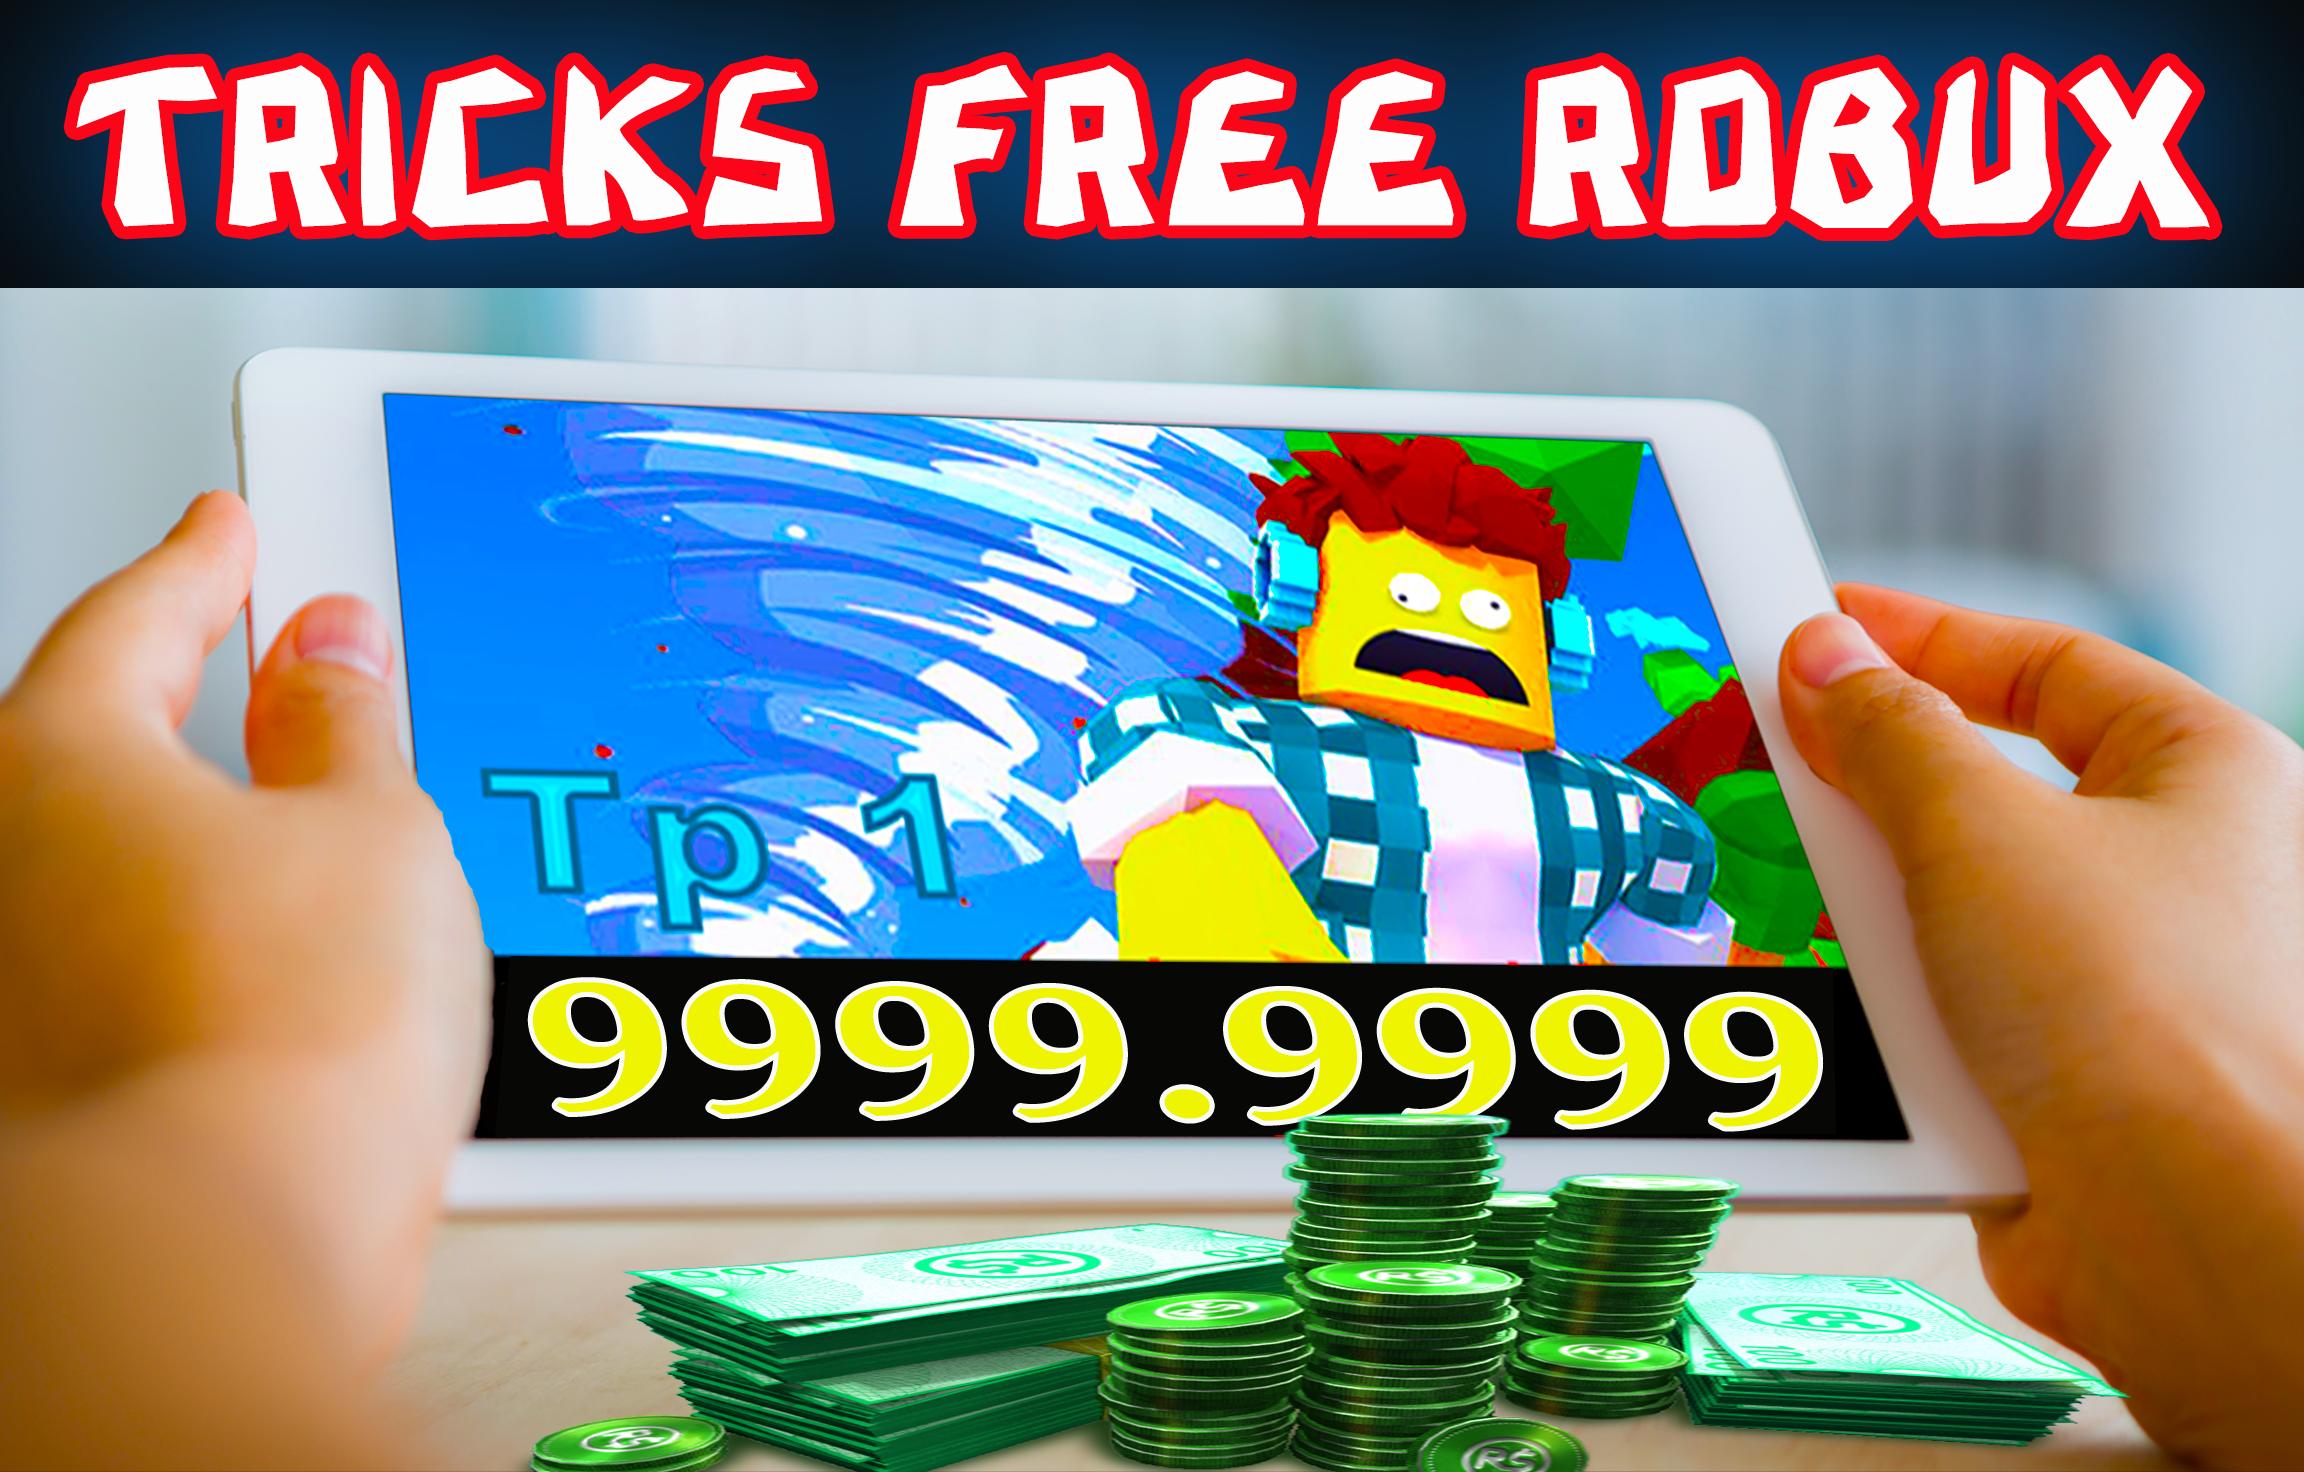 Tips For Roblox Free Robux For Android Apk Download - 9999 robux